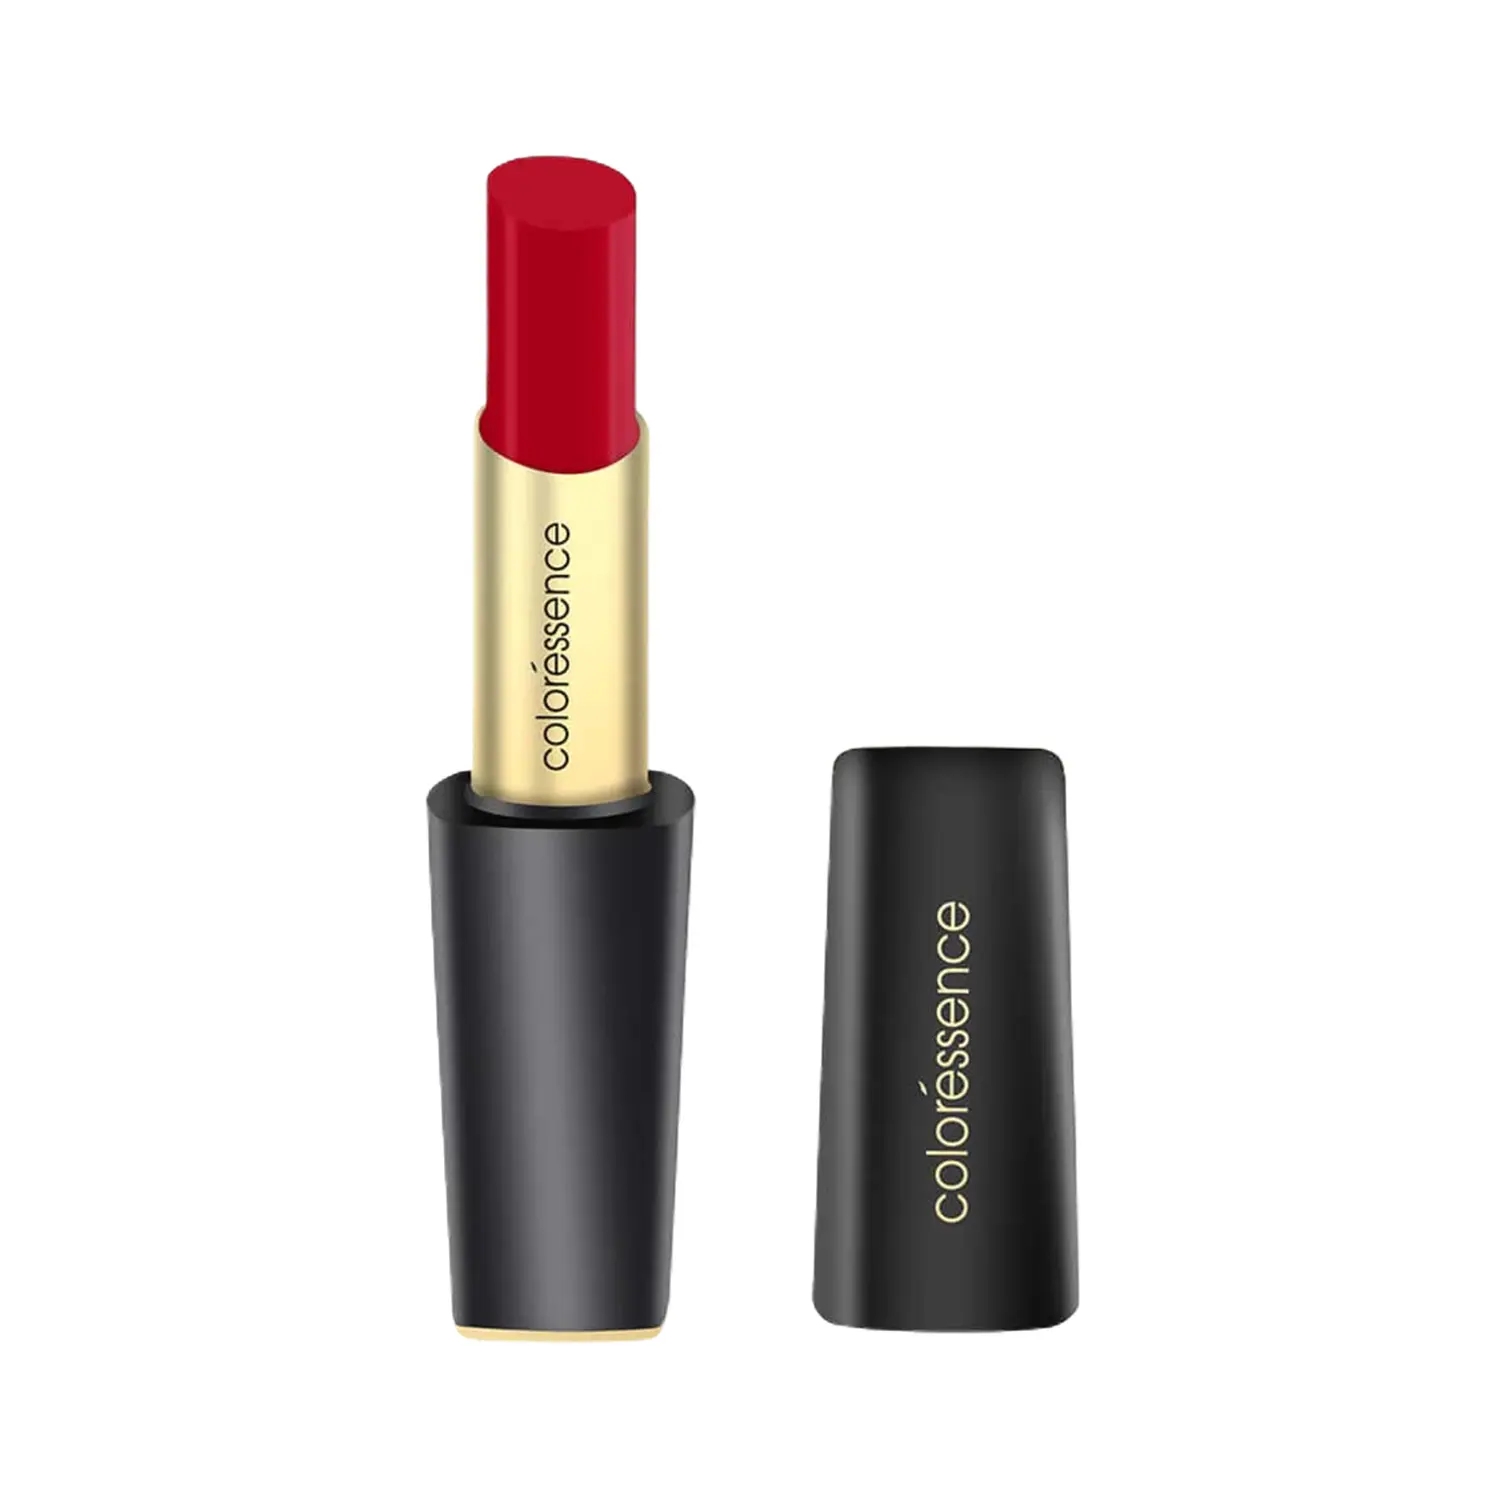 Coloressence | Coloressence Intense Long Wear Lip Color Glossy Lipstick - Under A Spell (2.5g)